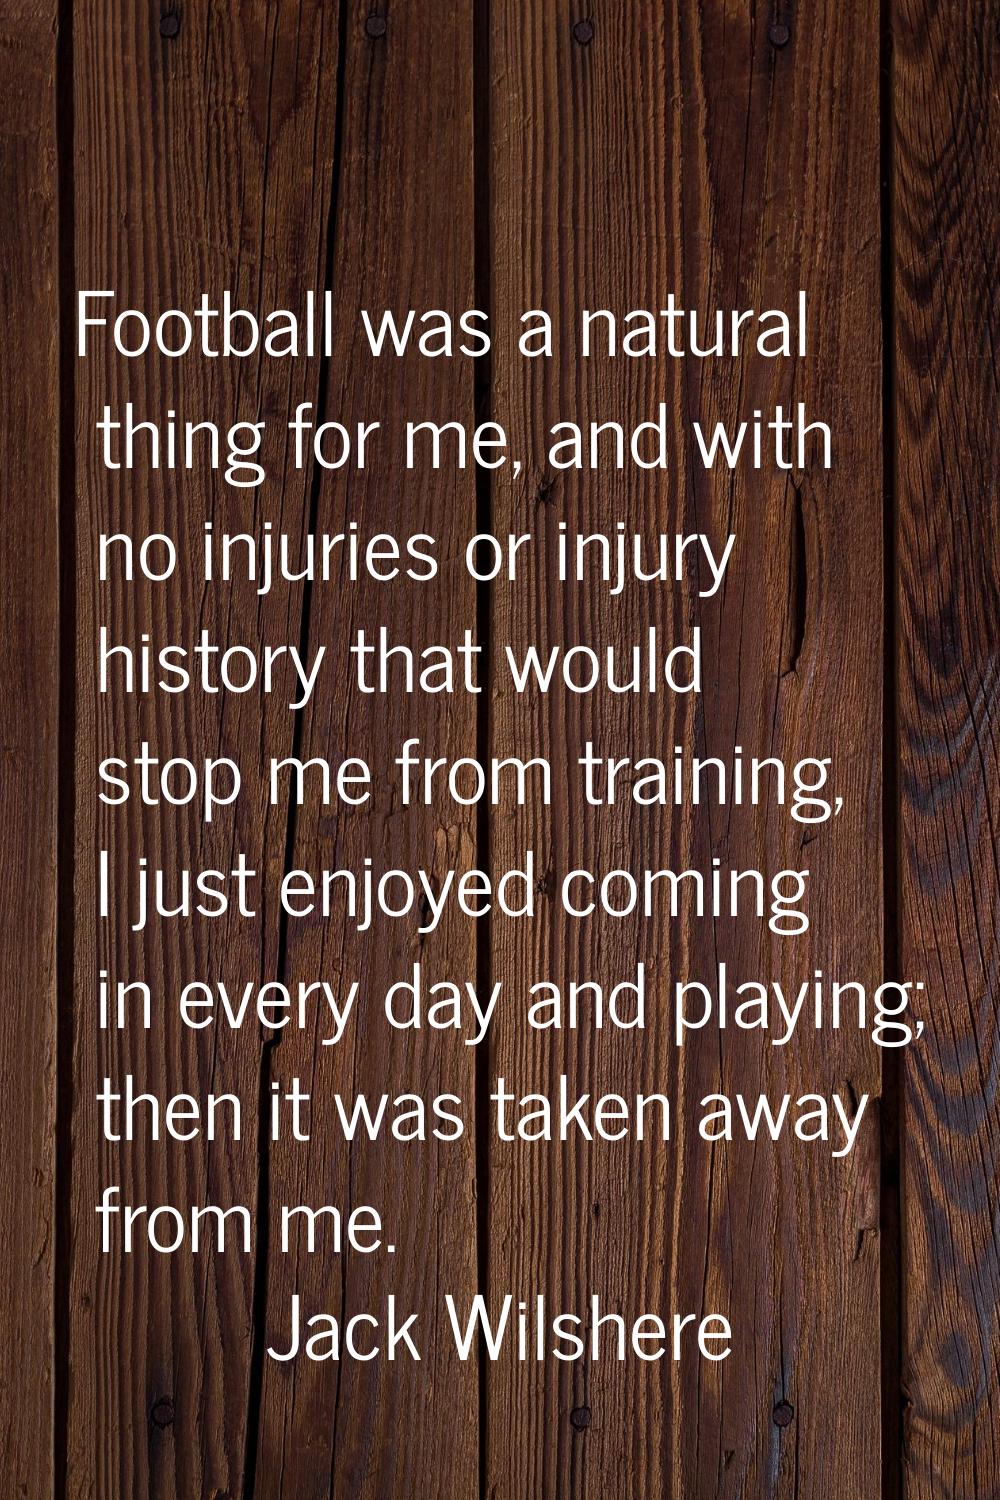 Football was a natural thing for me, and with no injuries or injury history that would stop me from